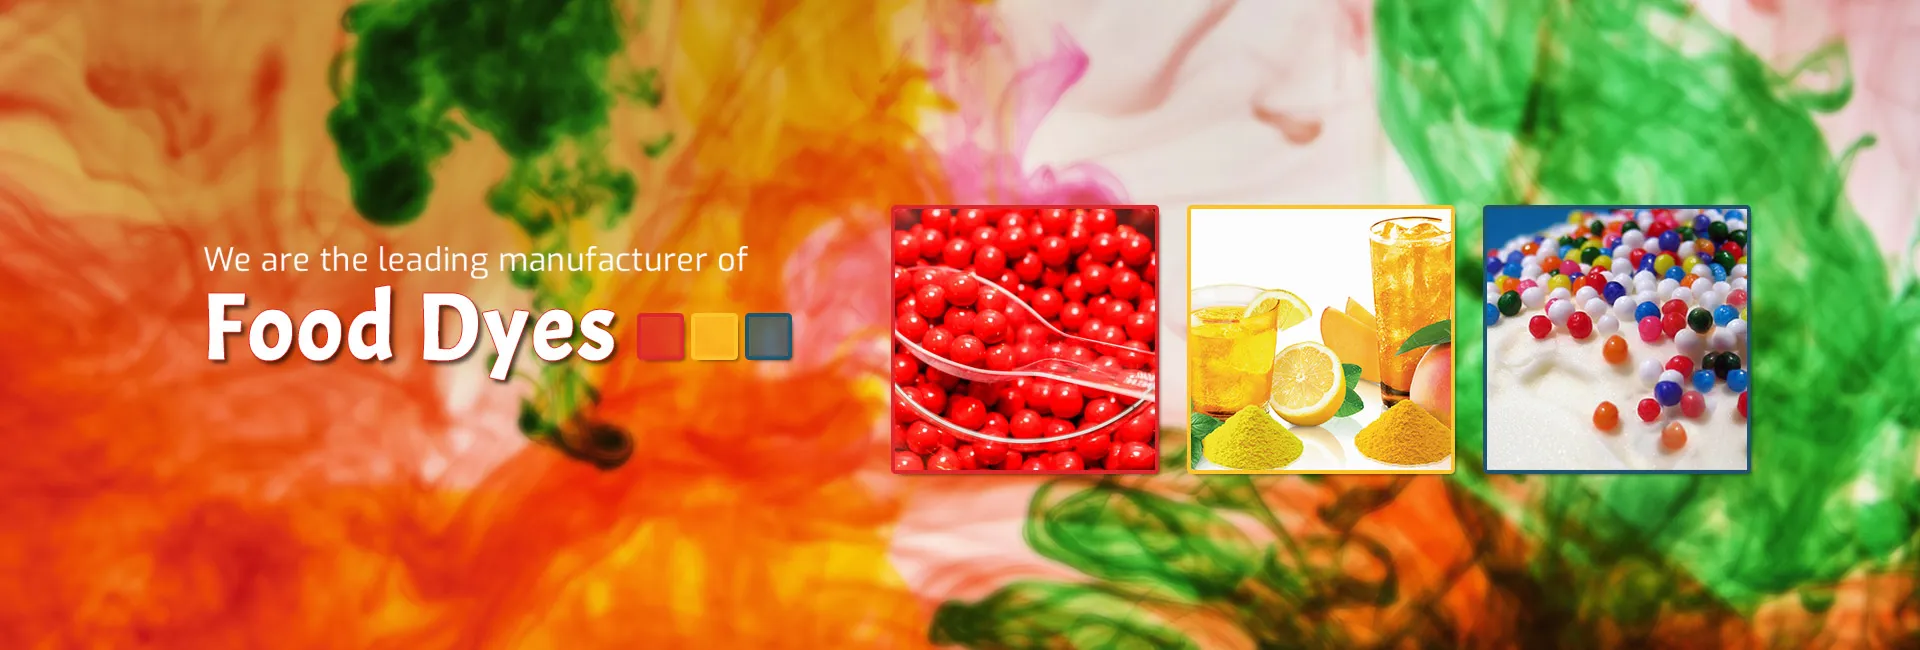 Food Dyes Manufacturer & Suppliers in Colombia